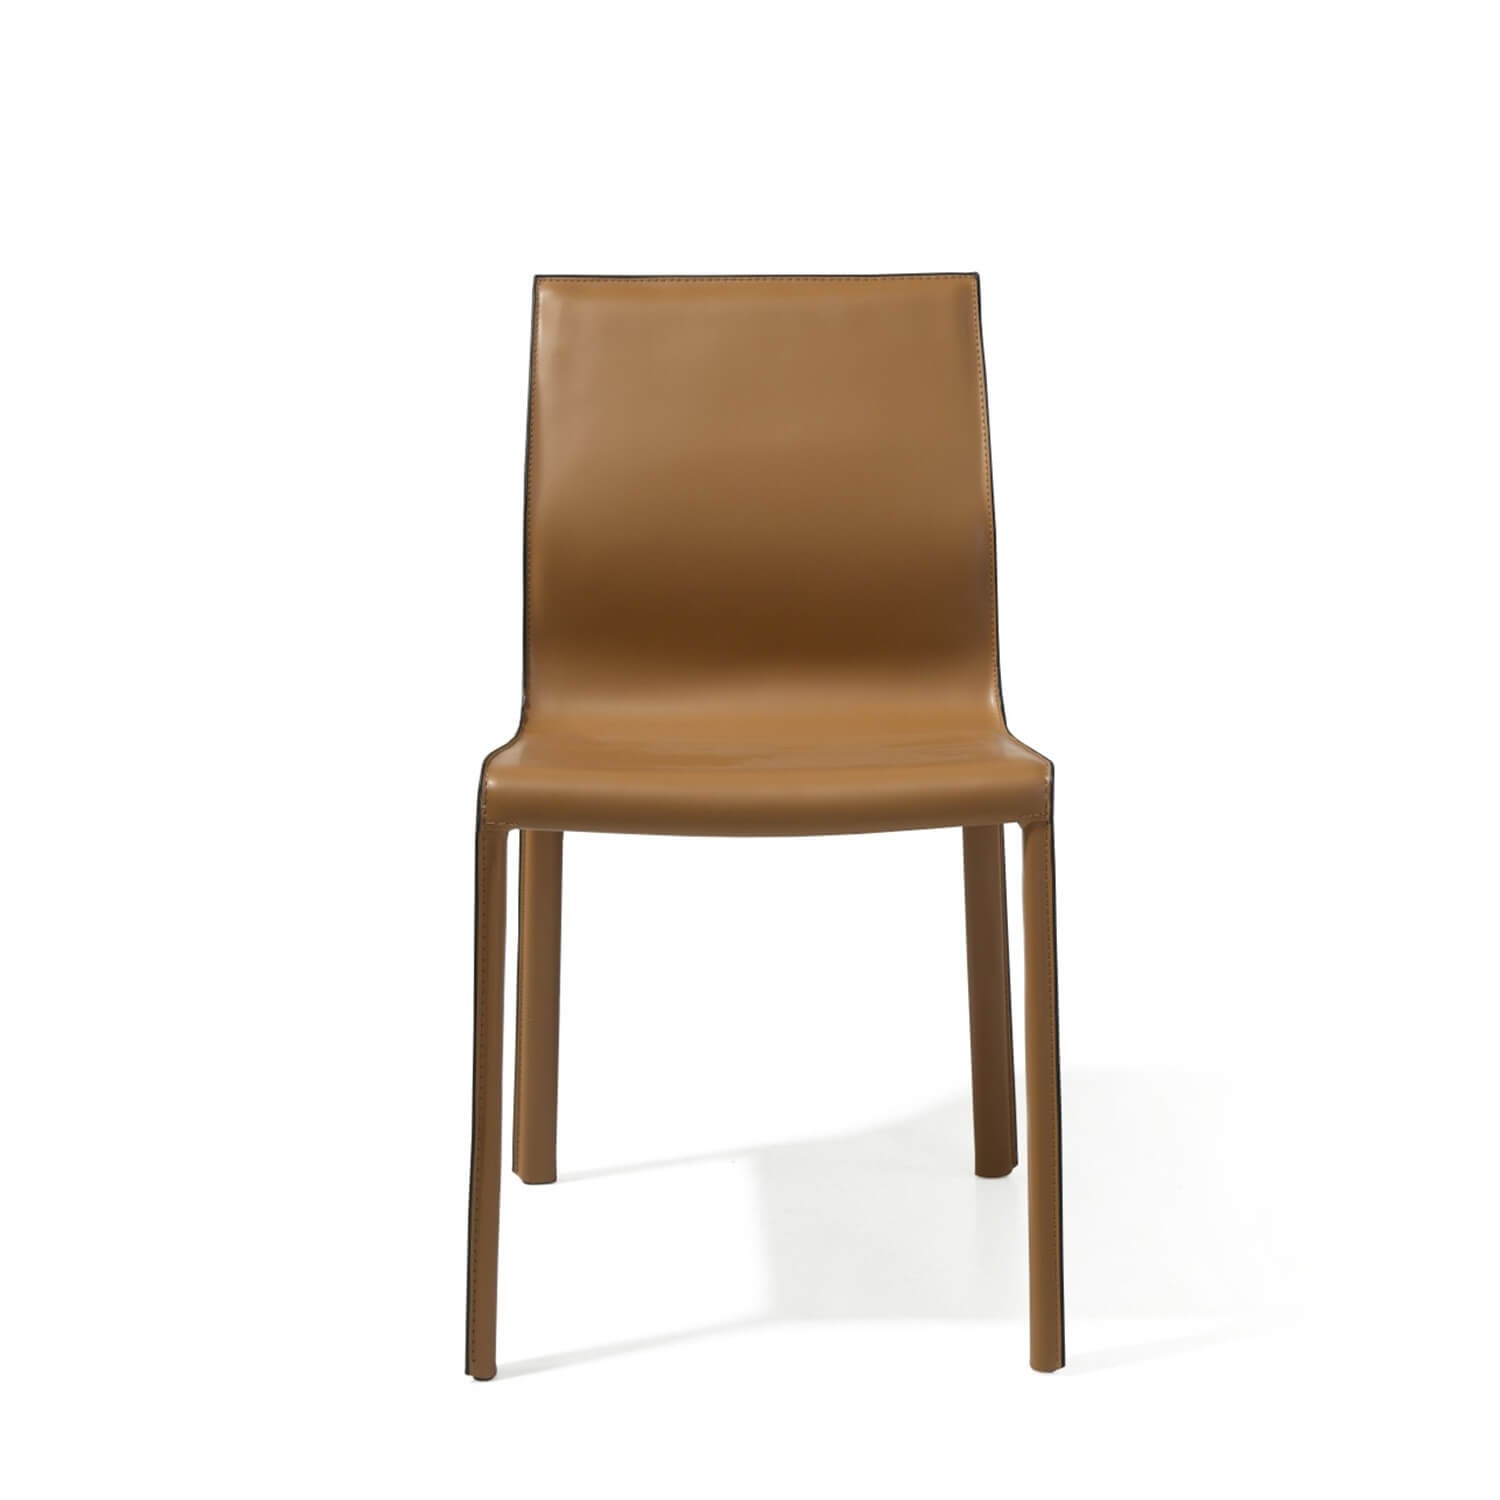 Orte dining chair